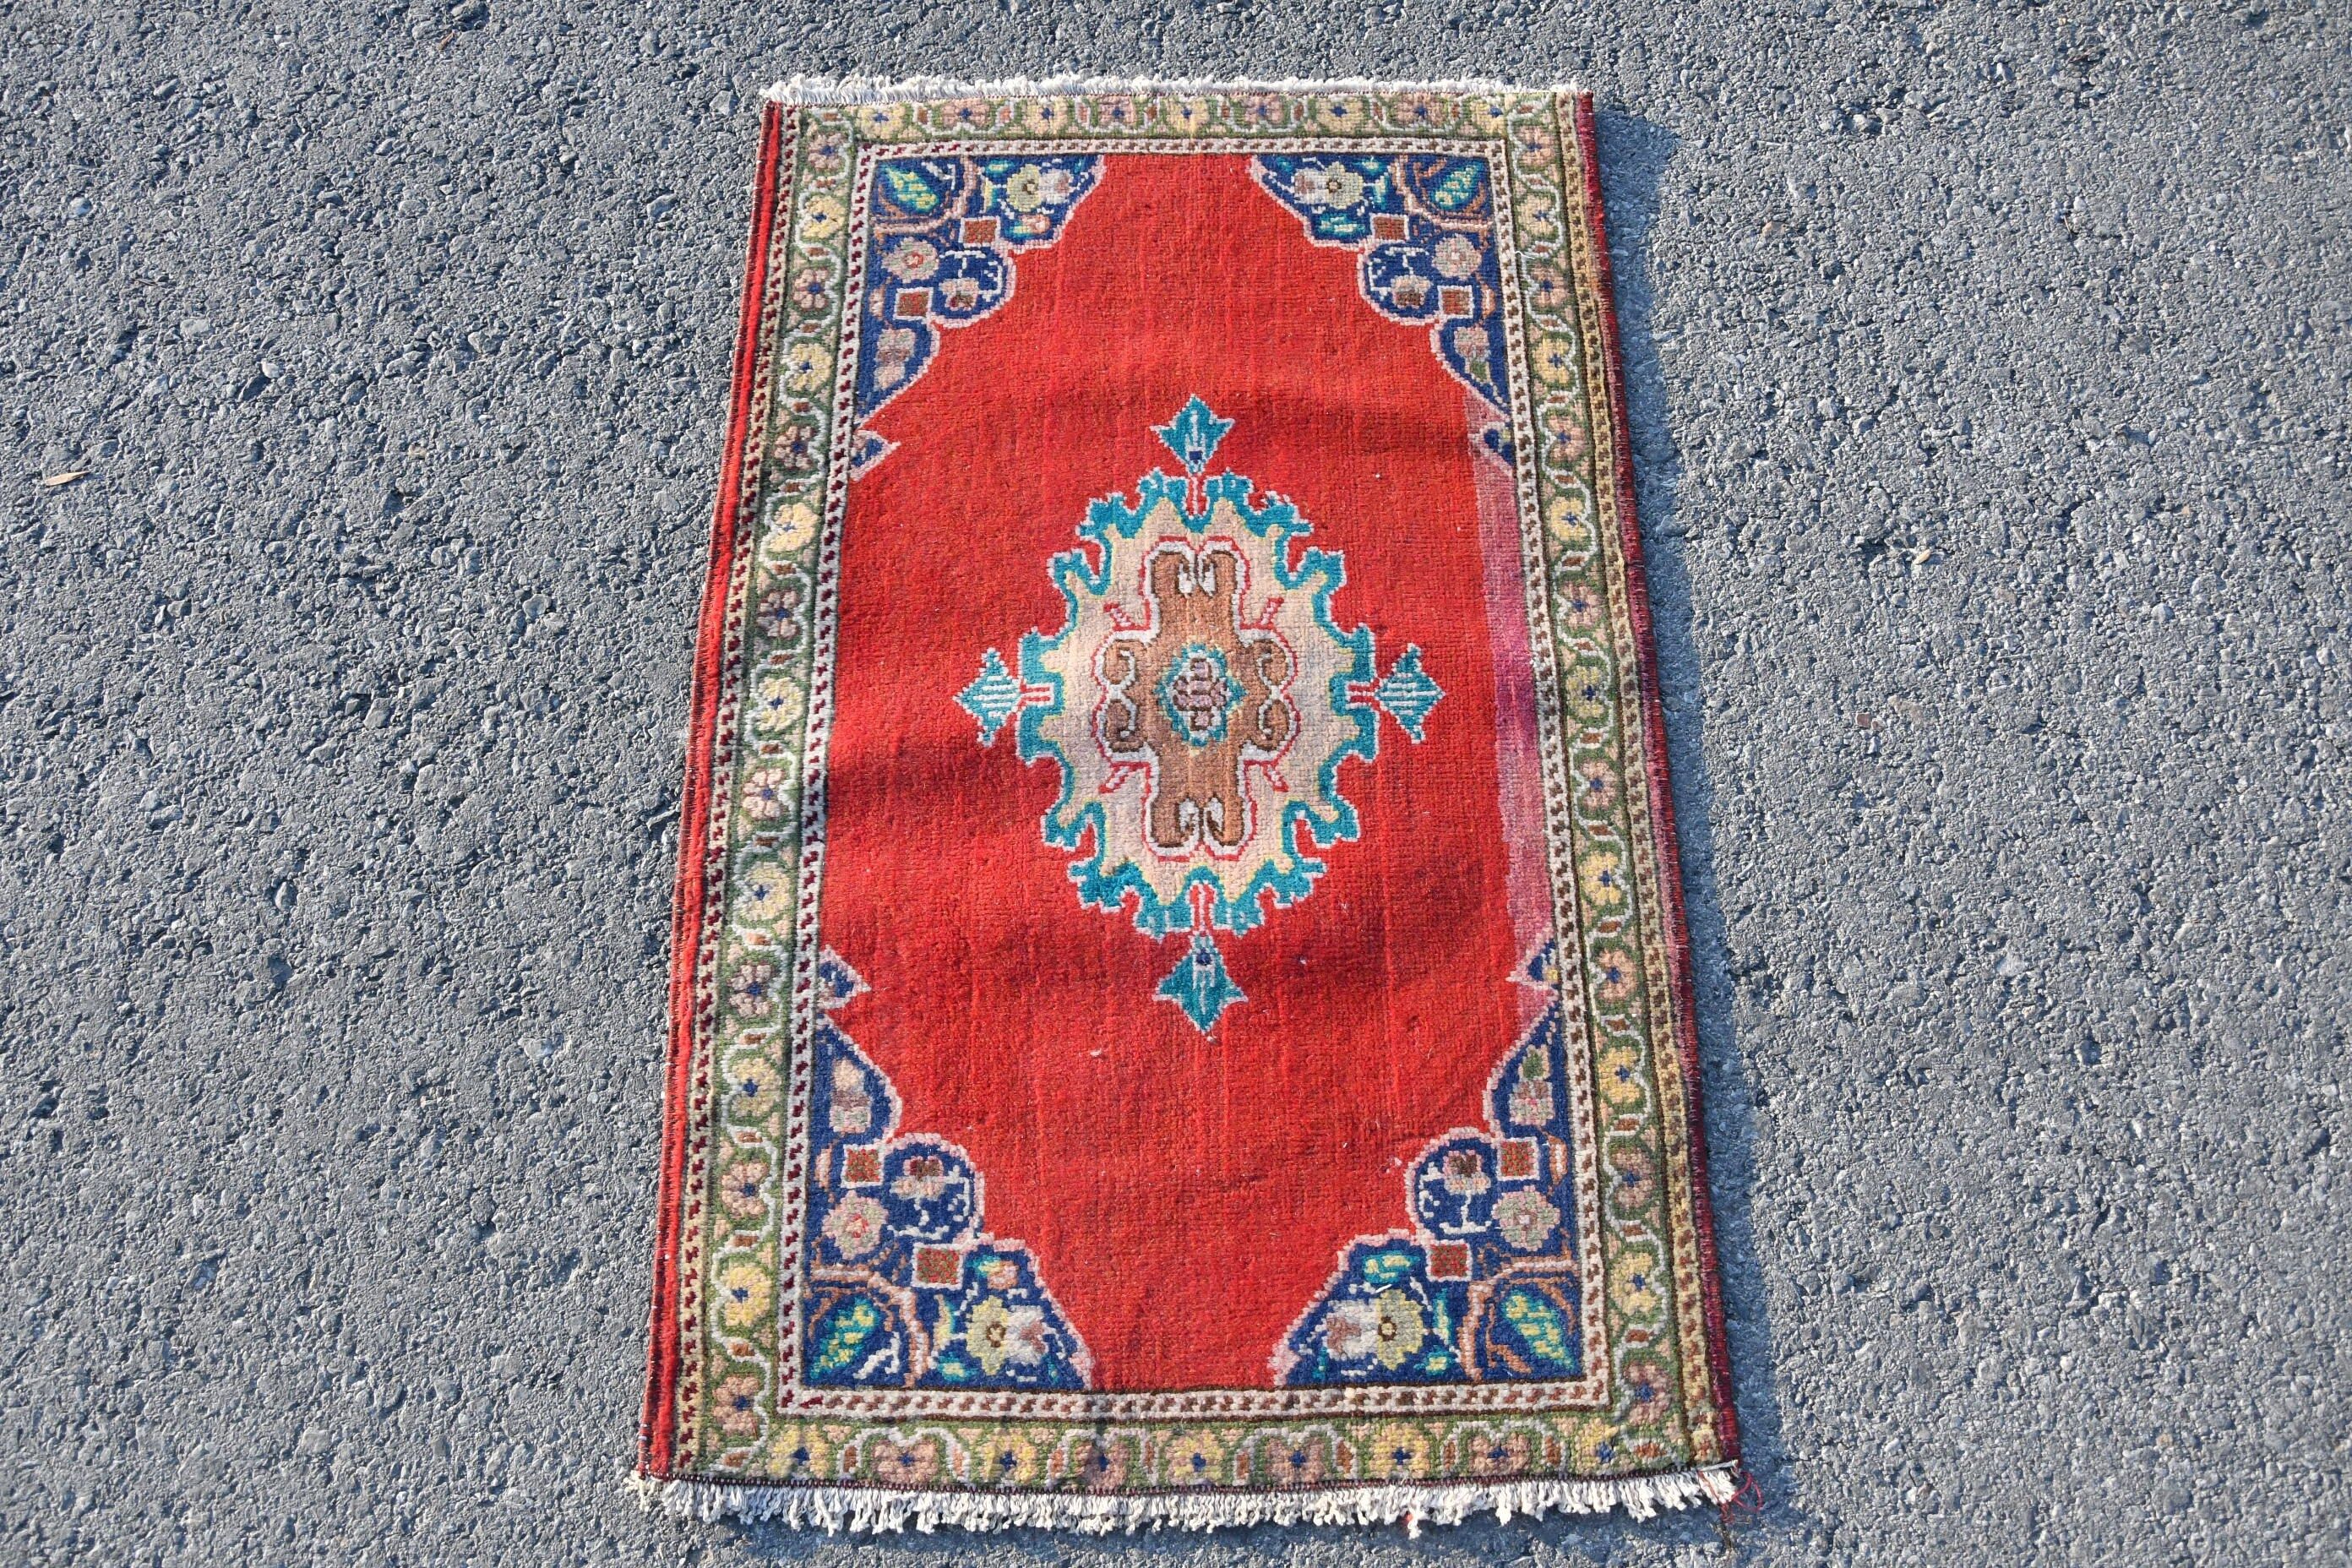 Wall Hanging Rug, Vintage Rugs, Car Mat Rugs, 1.7x2.7 ft Small Rugs, Handwoven Rug, Turkish Rug, Rugs for Kitchen, Wool Rug, Oriental Rug